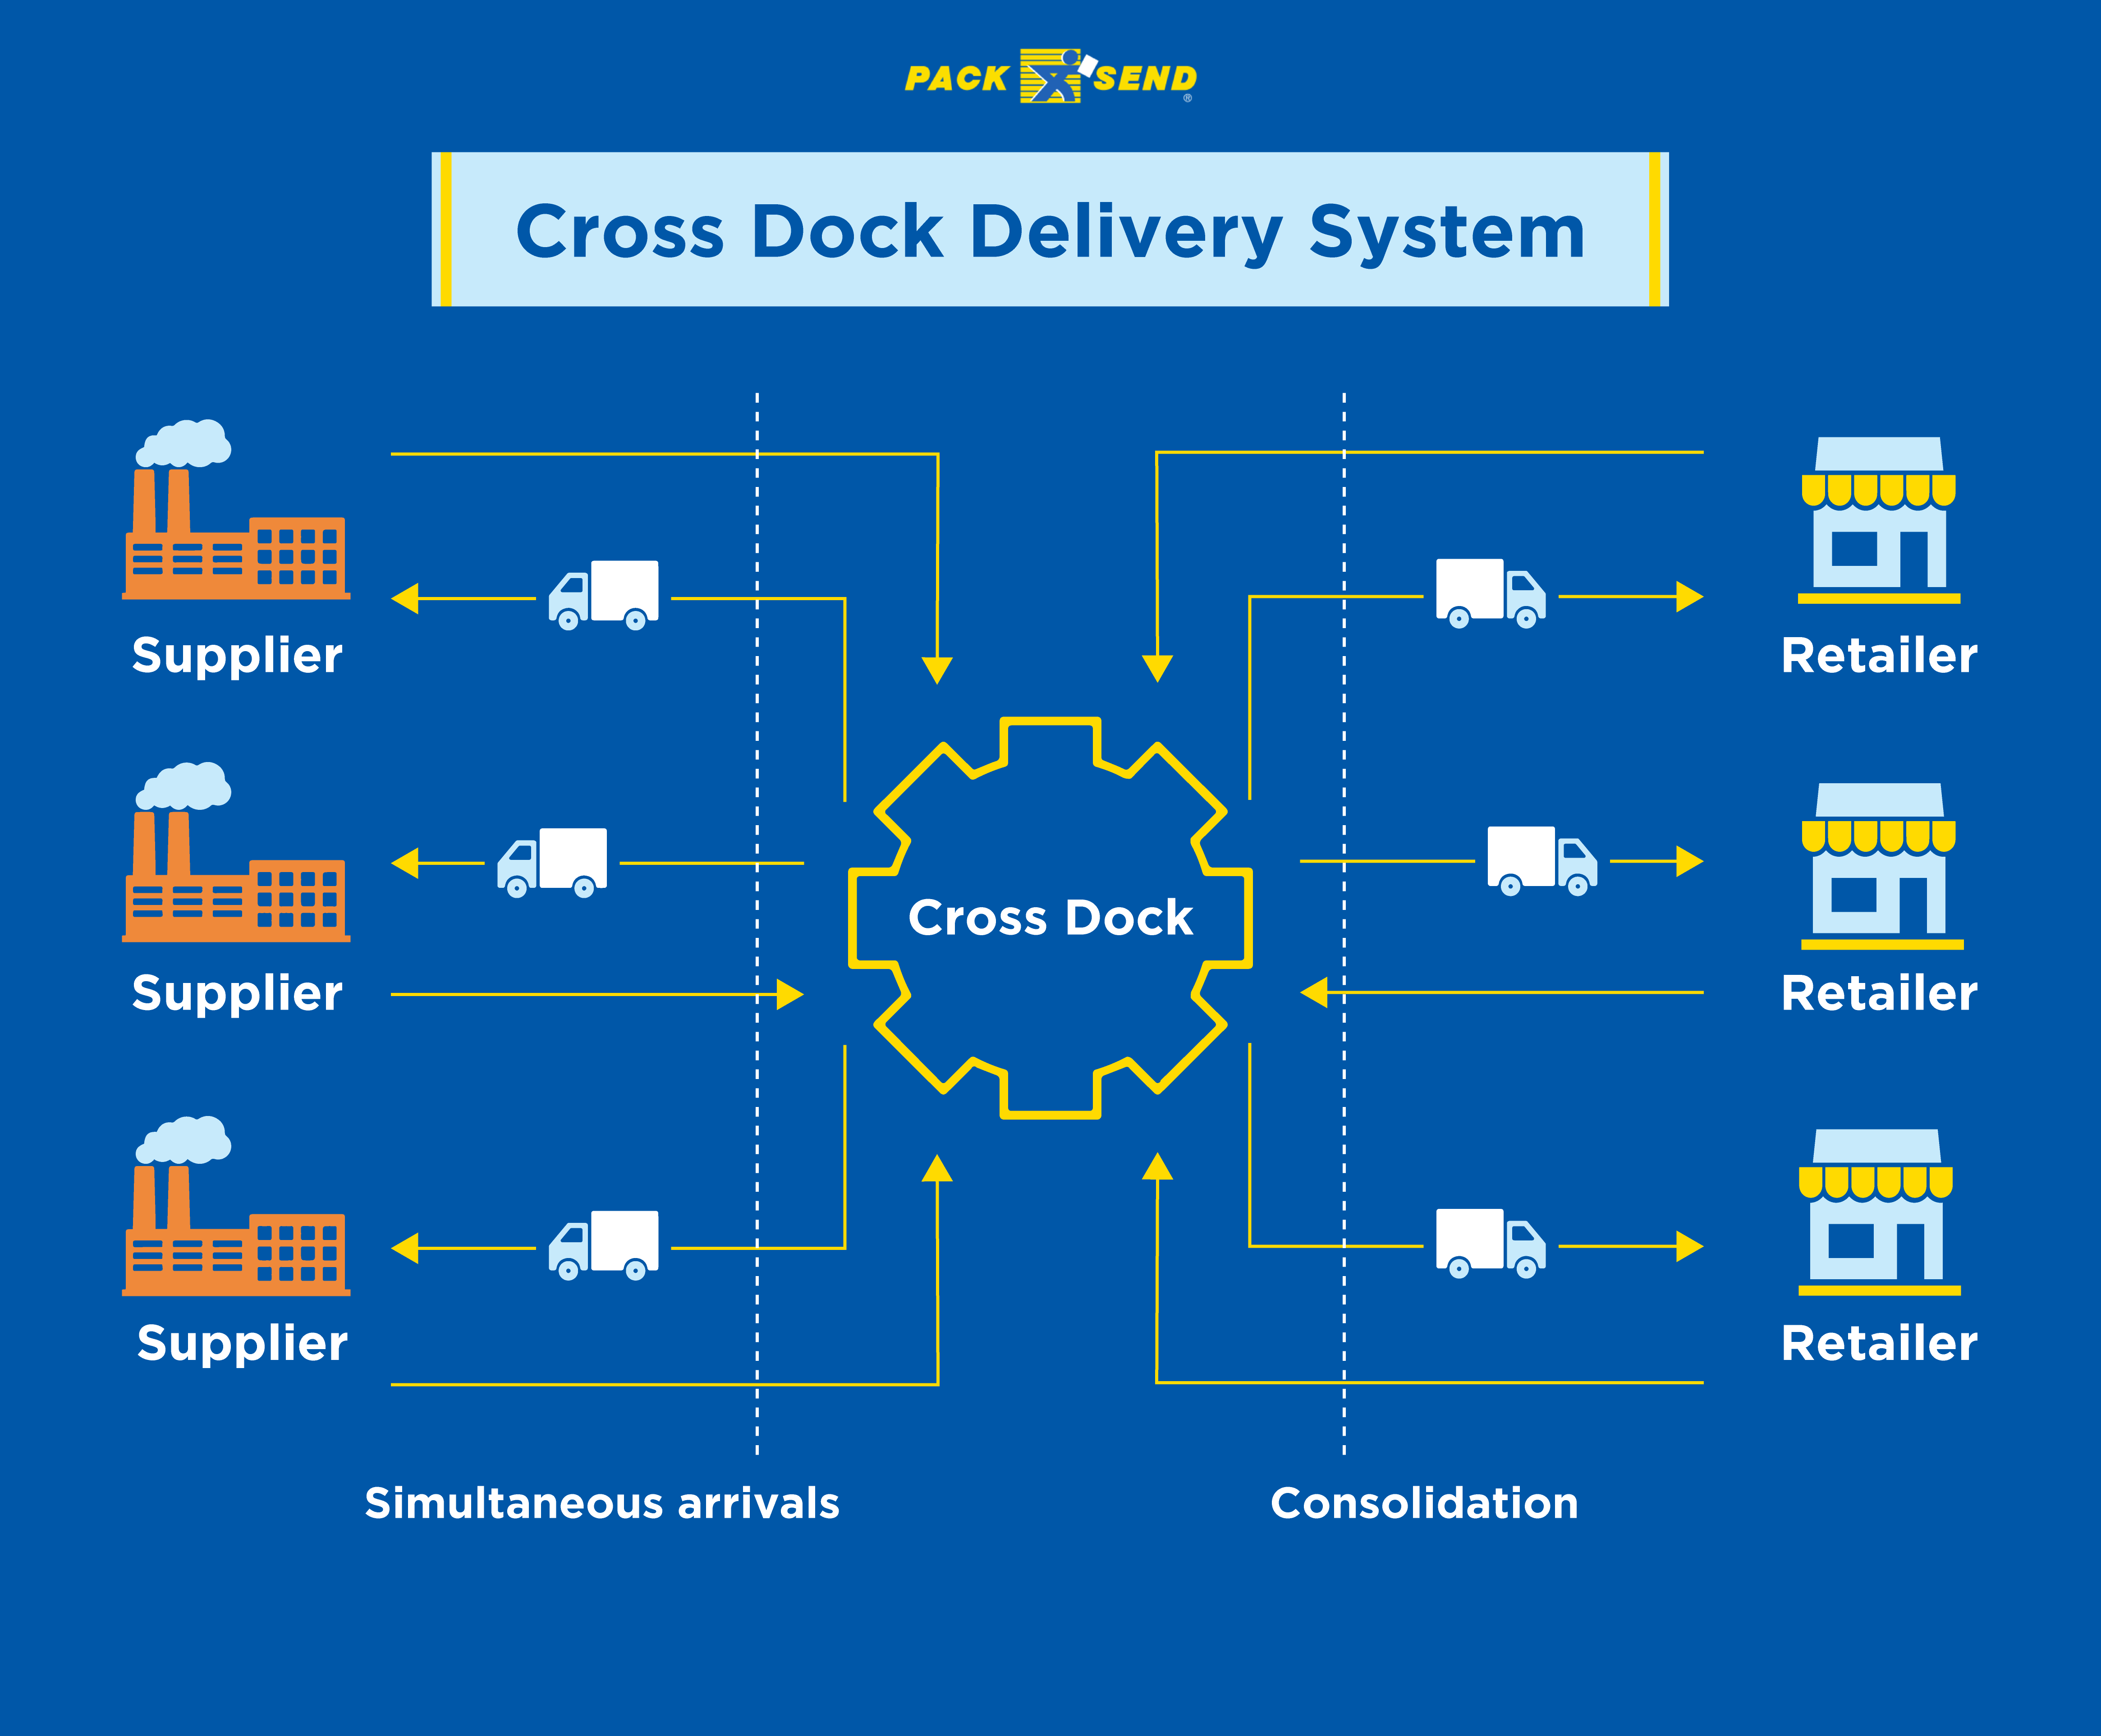 How cross dock delivery system works